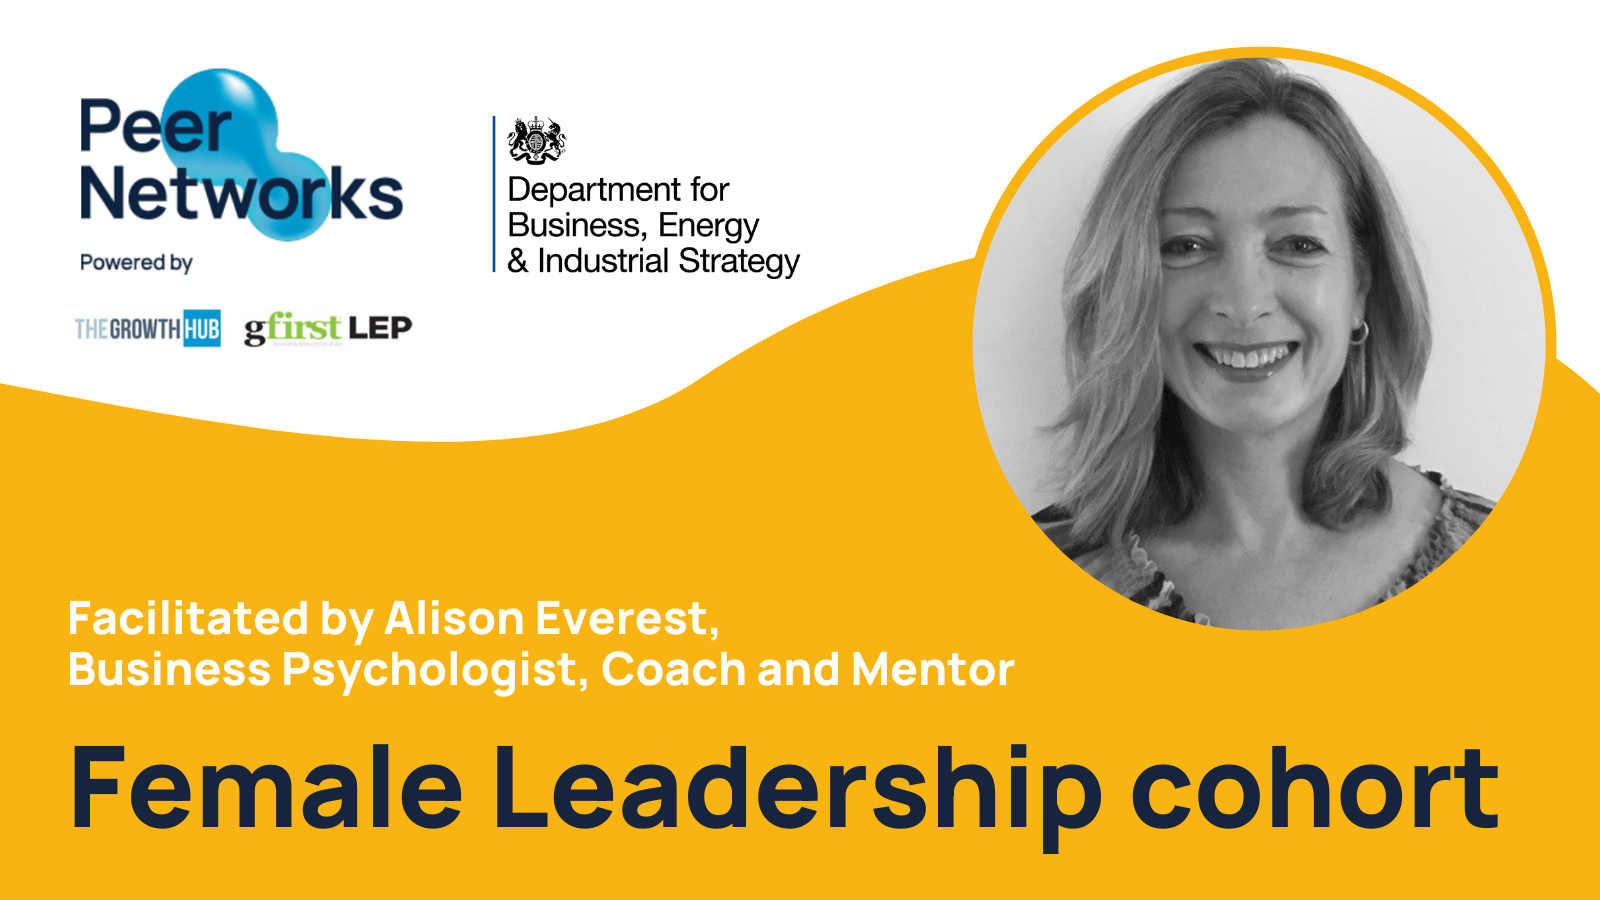 Alison Everest; Business Psychologist, Coach and Mentor, is proudly facilitating Gloucestershire’s Female Leadership Peer Networks cohort.